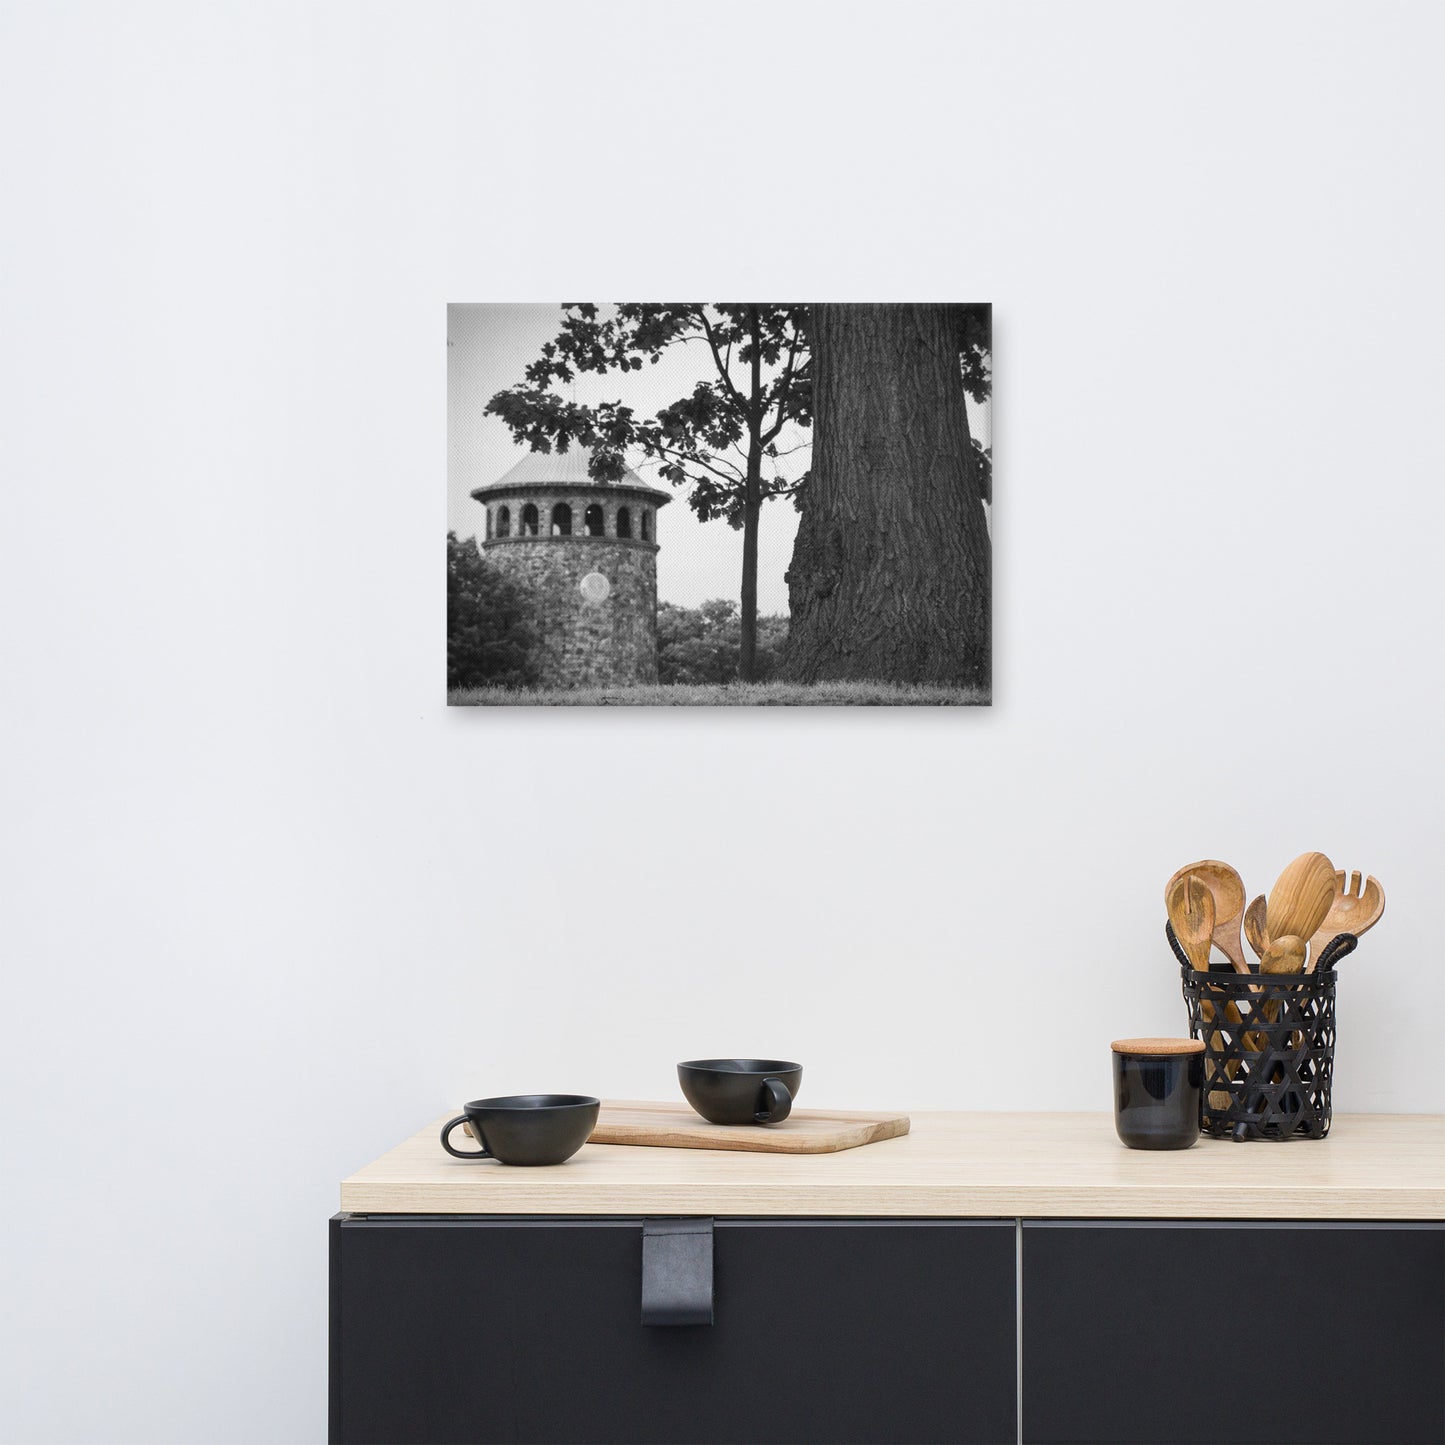 Rockford Tower 2 Black and White Rural Landscape Canvas Wall Art Prints